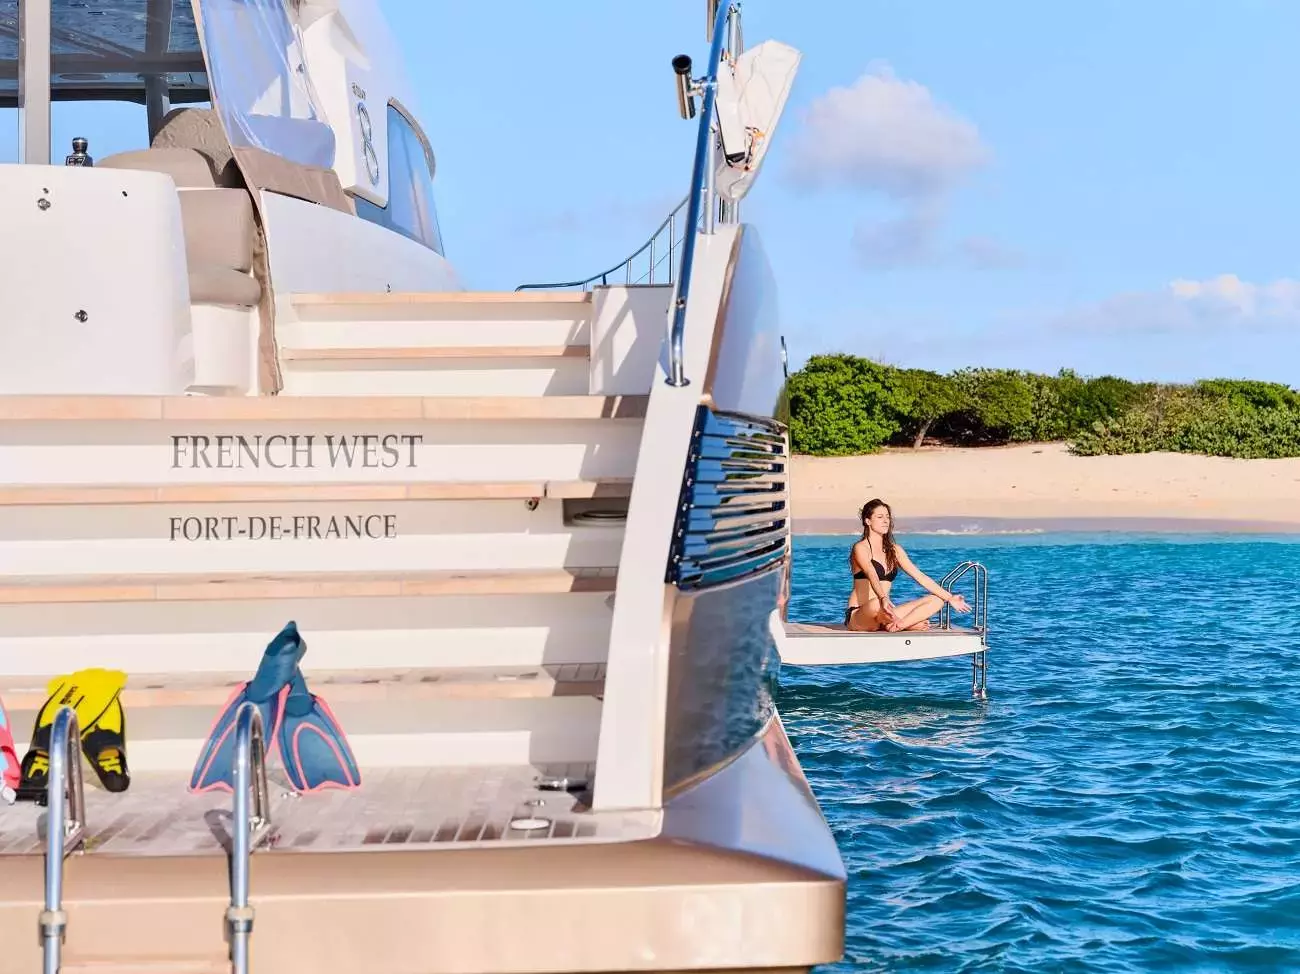 Frenchwest by Lagoon - Top rates for a Rental of a private Power Catamaran in Martinique